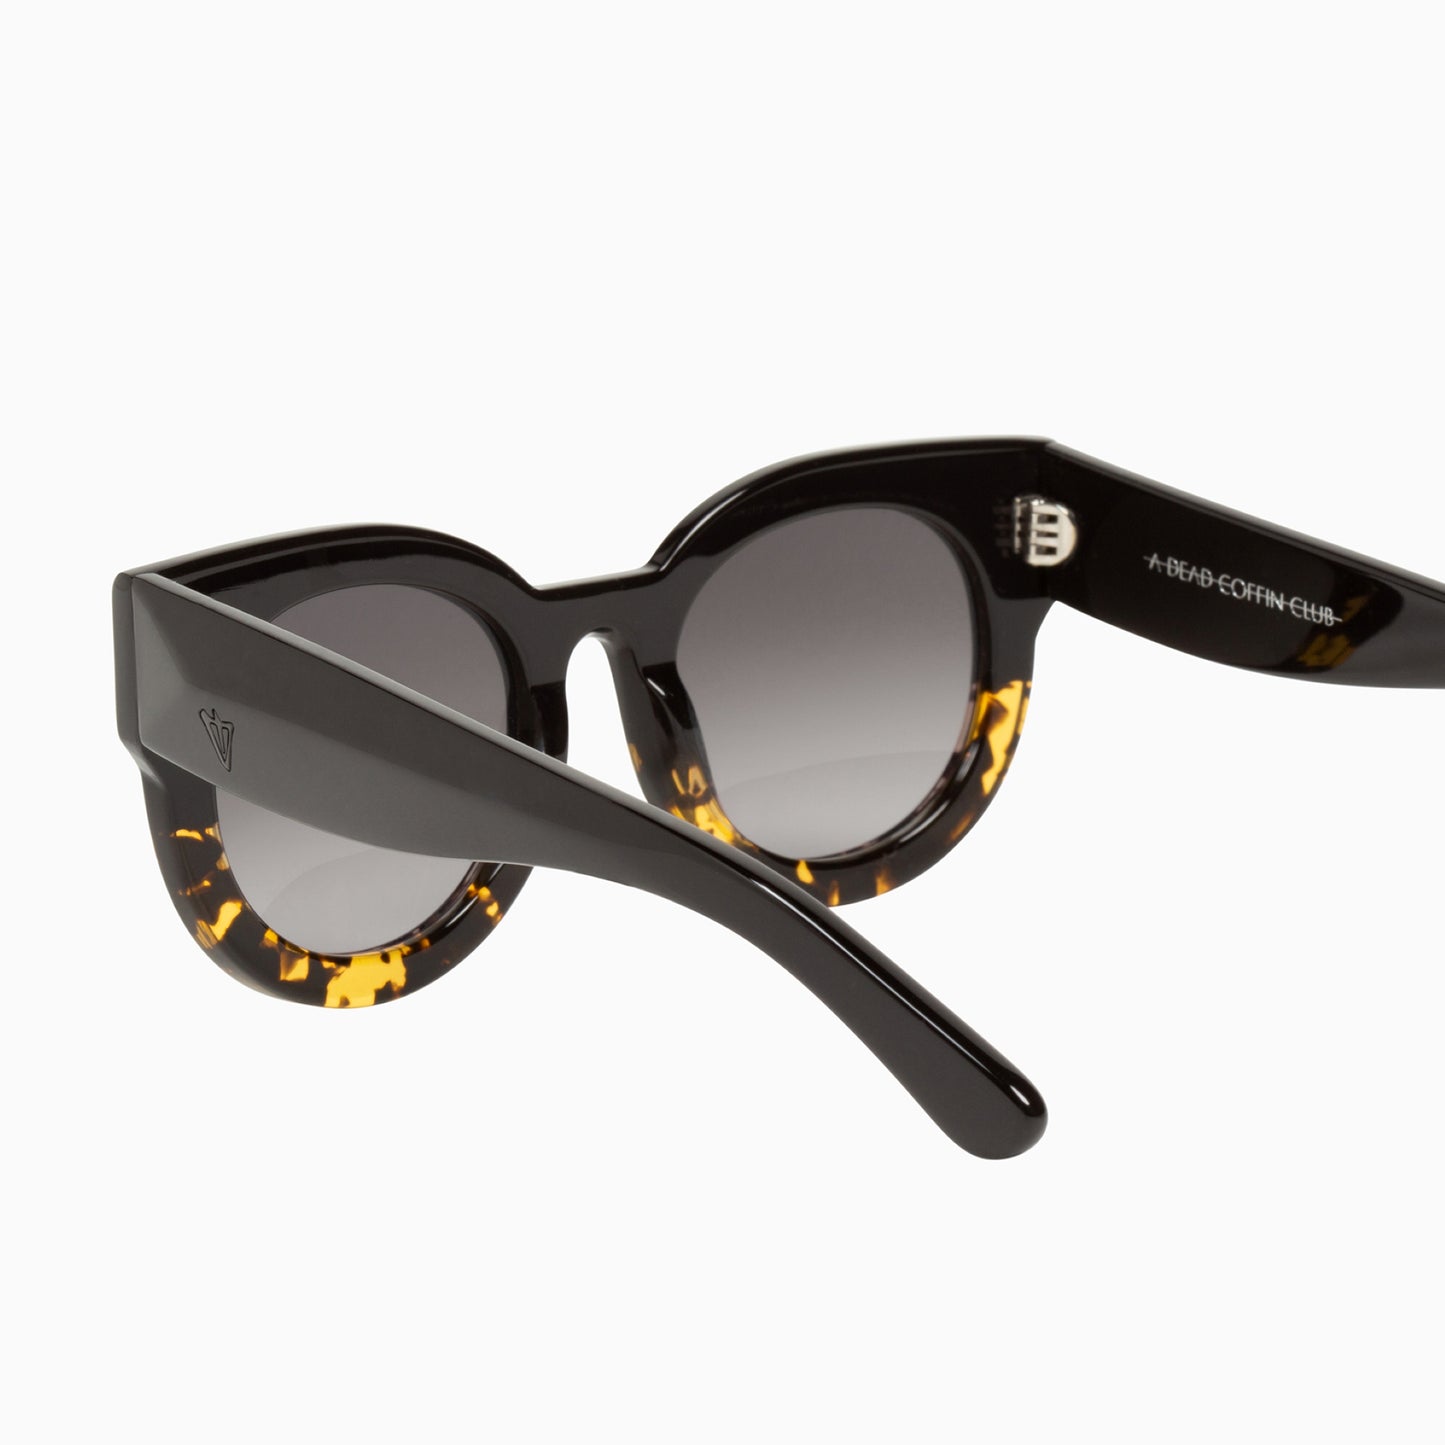 Valley A Dead Coffin Club Sunglasses black to tort with brown gradient lens Back of glasses